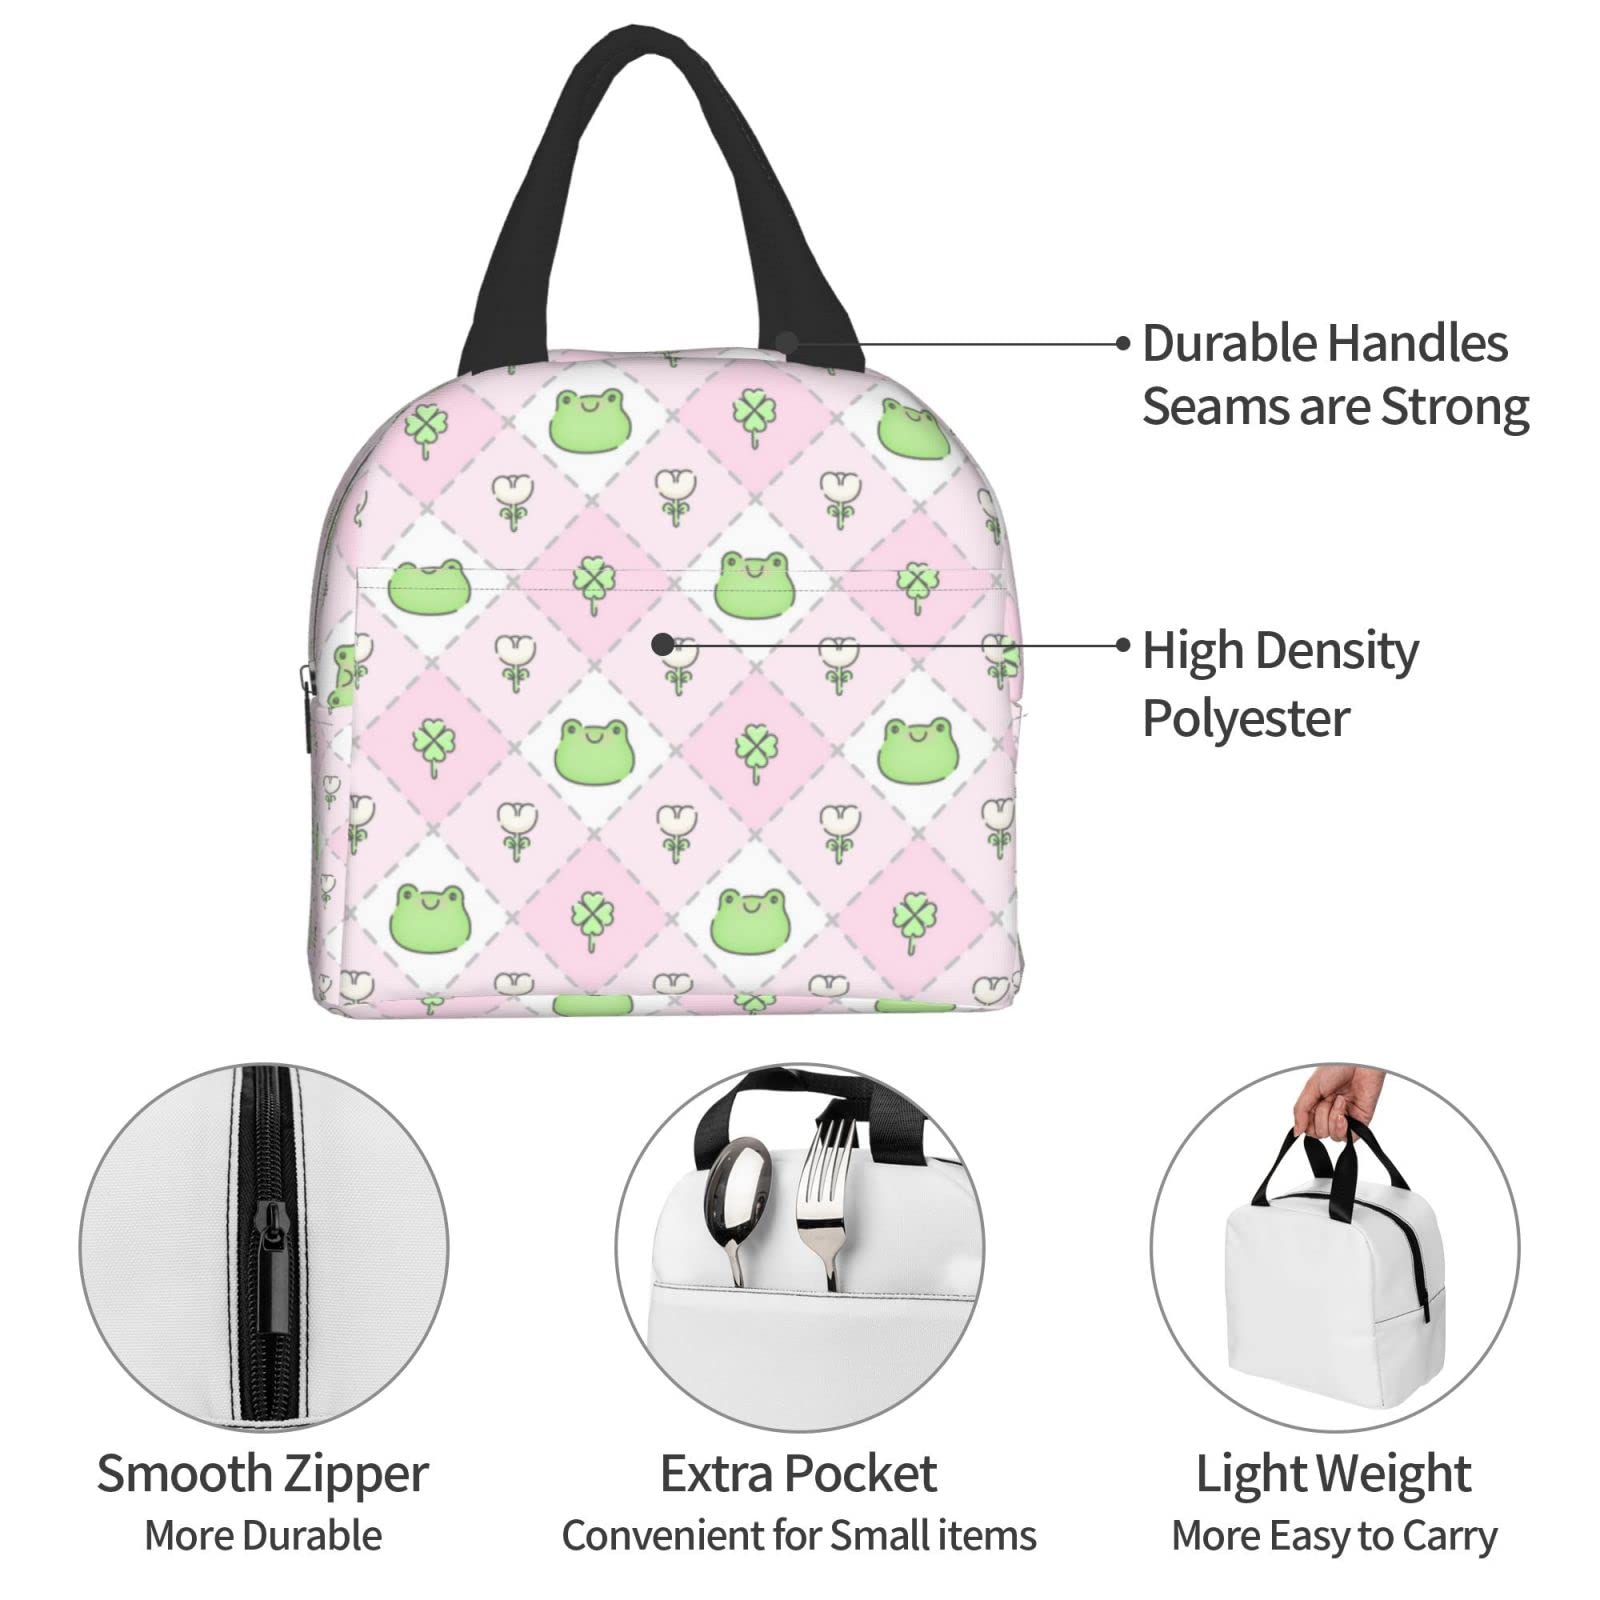 Ucsaxue Green Frog Kawaii Pink Lunch Bag Travel Box Work Bento Cooler Reusable Tote Picnic Boxes Insulated Container Shopping Bags For Adult Women Men